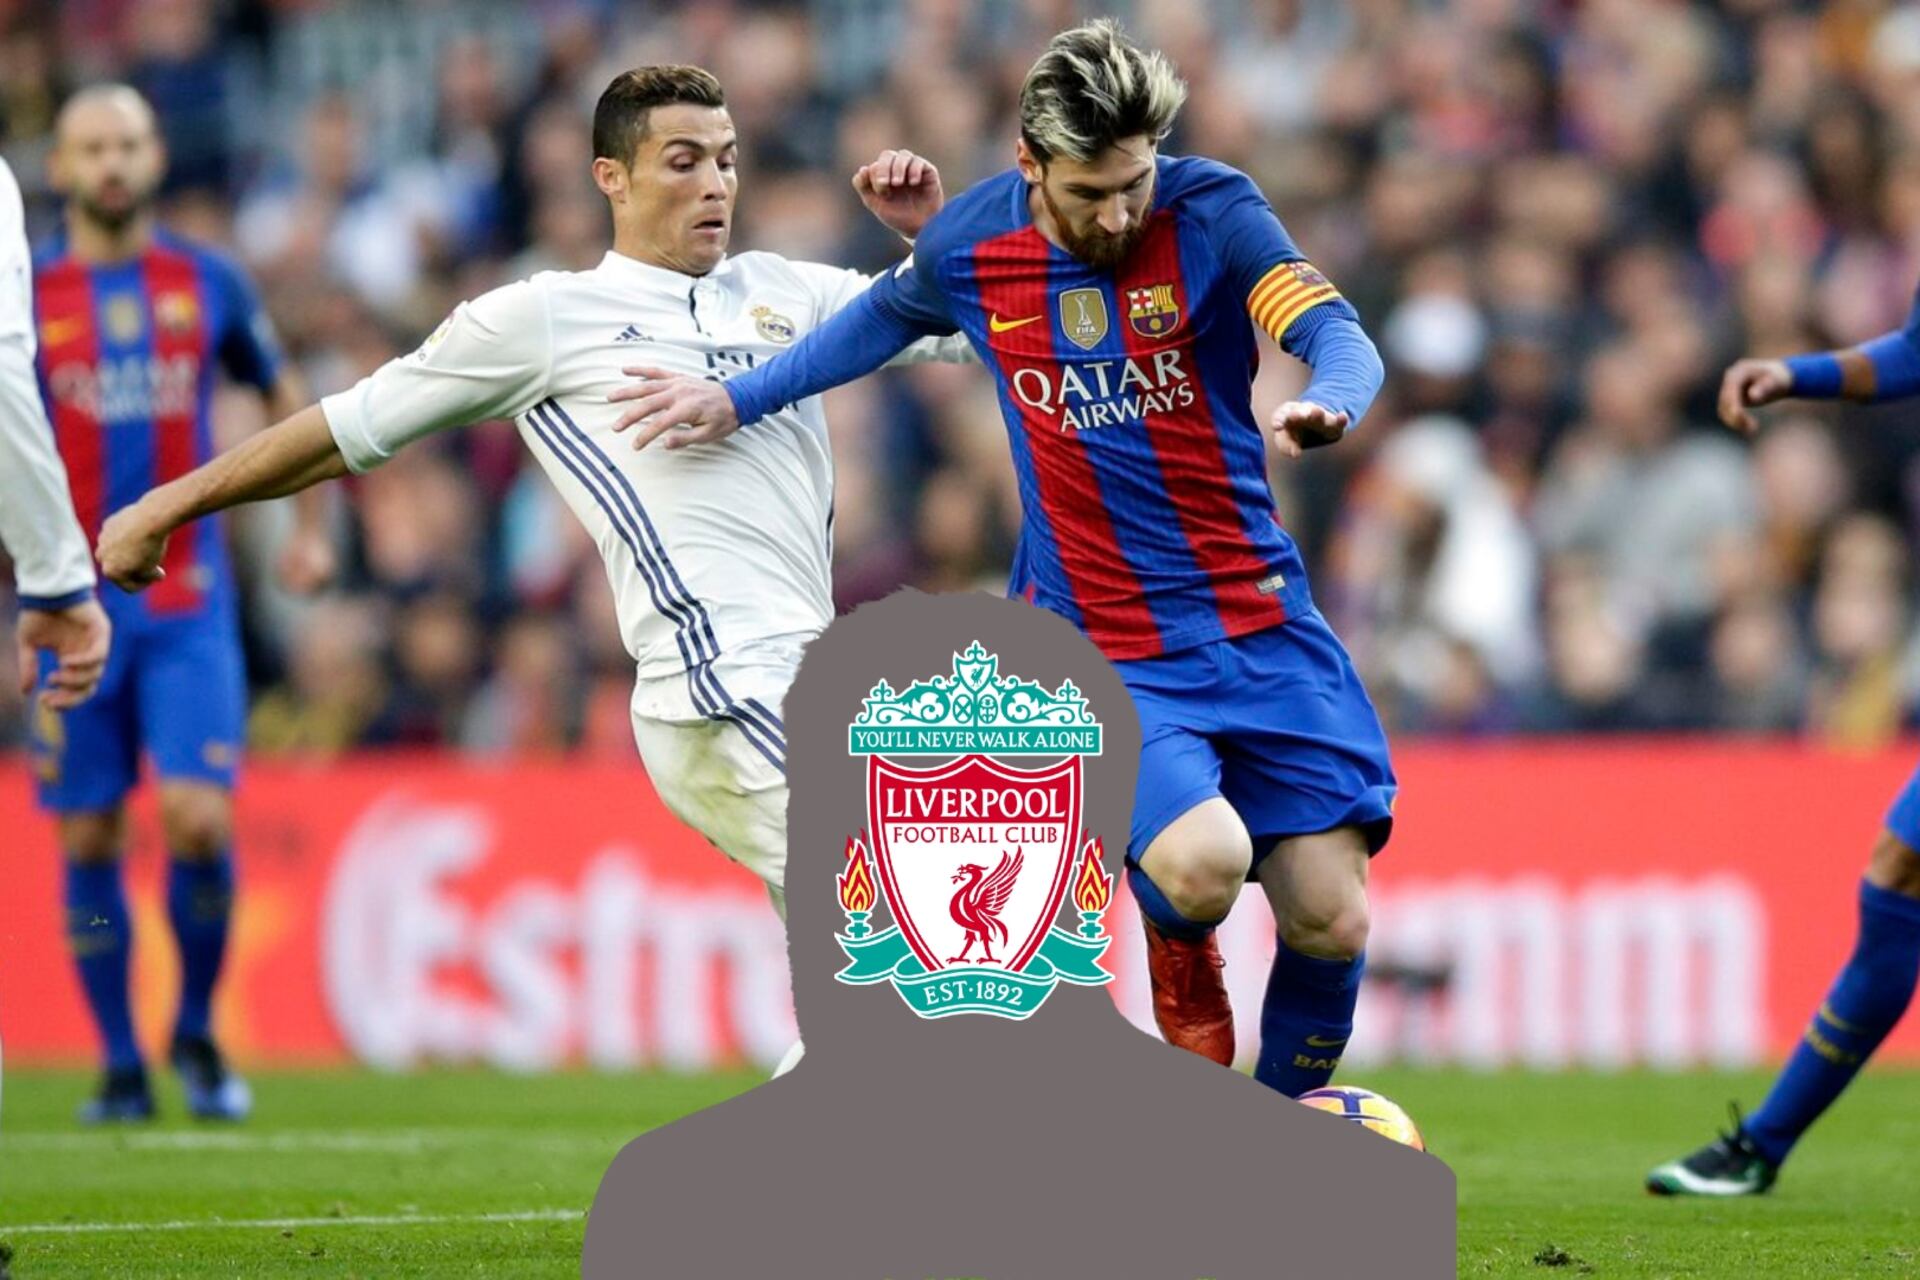 Cristiano and Messi can't stand each other? Liverpool legend reveals the reason why CR7 & Messi may not like each other